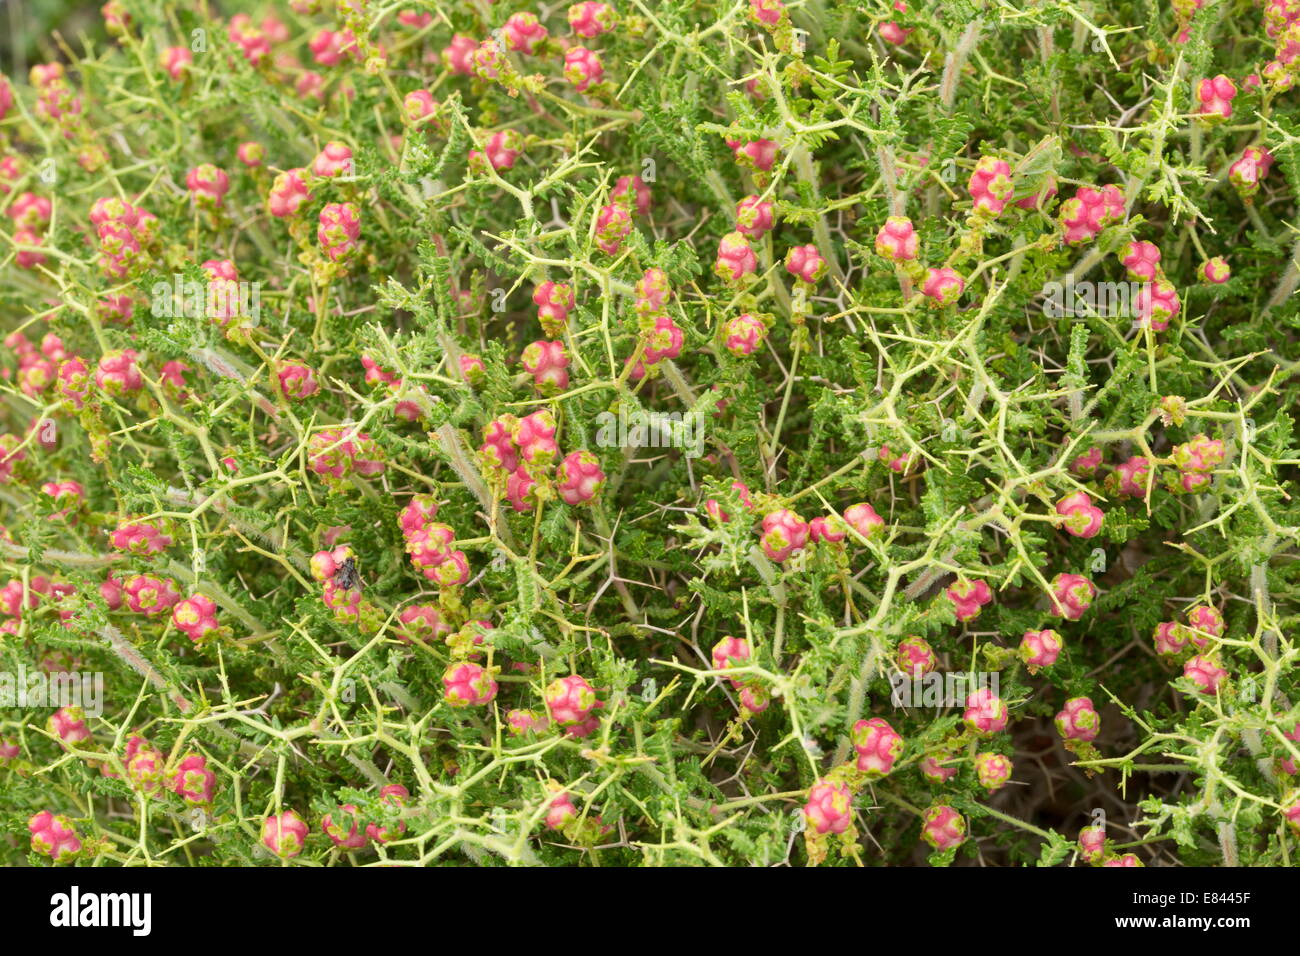 Spiny burnet, Sarcopoterium spinosum in fruit. A garrigue plant, strongly adapted to grazing. Chios, Greece. Stock Photo